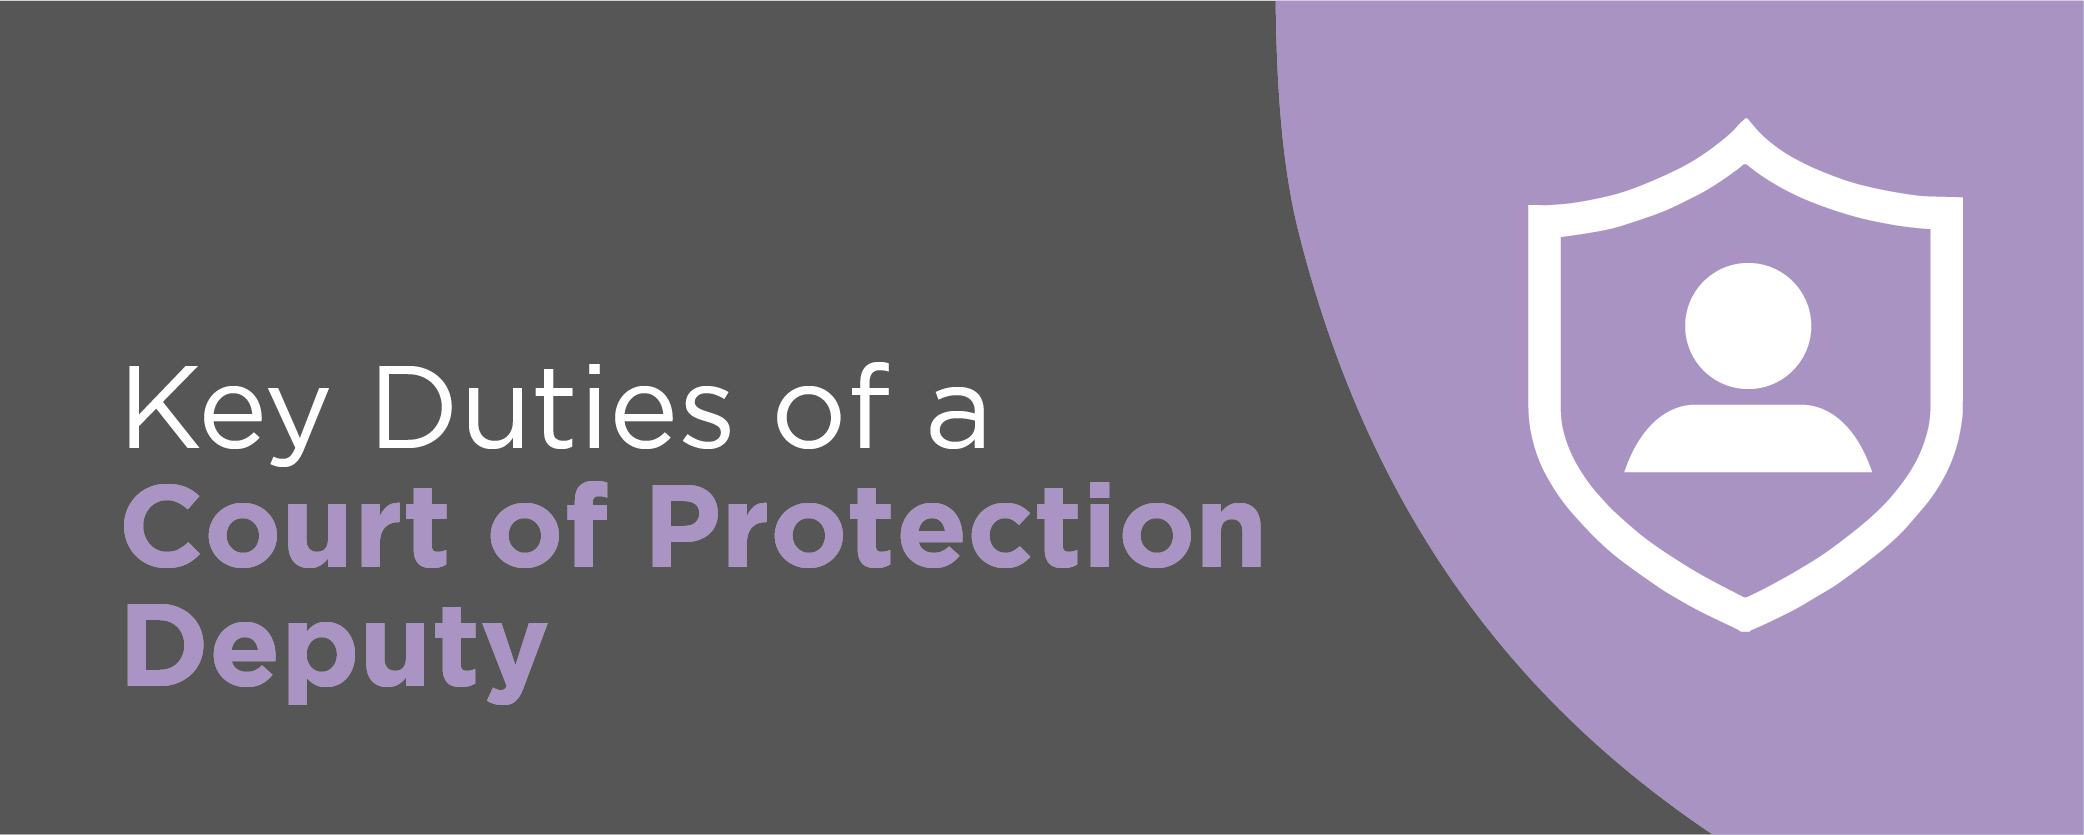 Key Duties of a Court of Protection Deputy